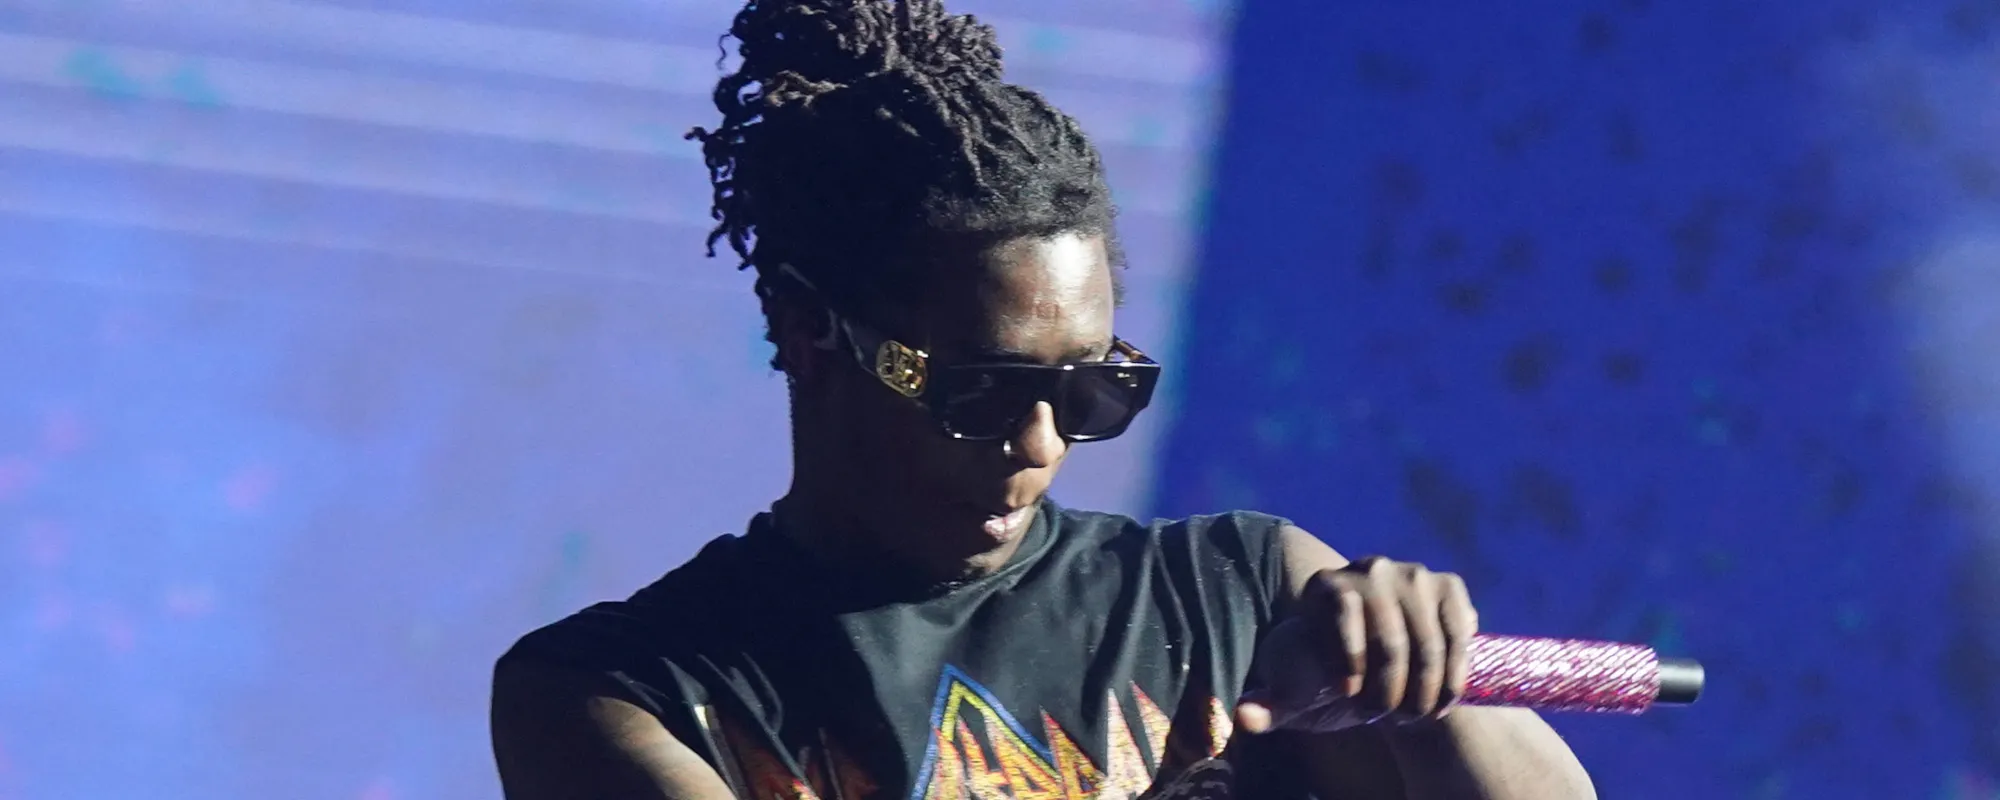 Young Thug Releases Deluxe Album Featuring Nicki Minaj and Juice WRLD